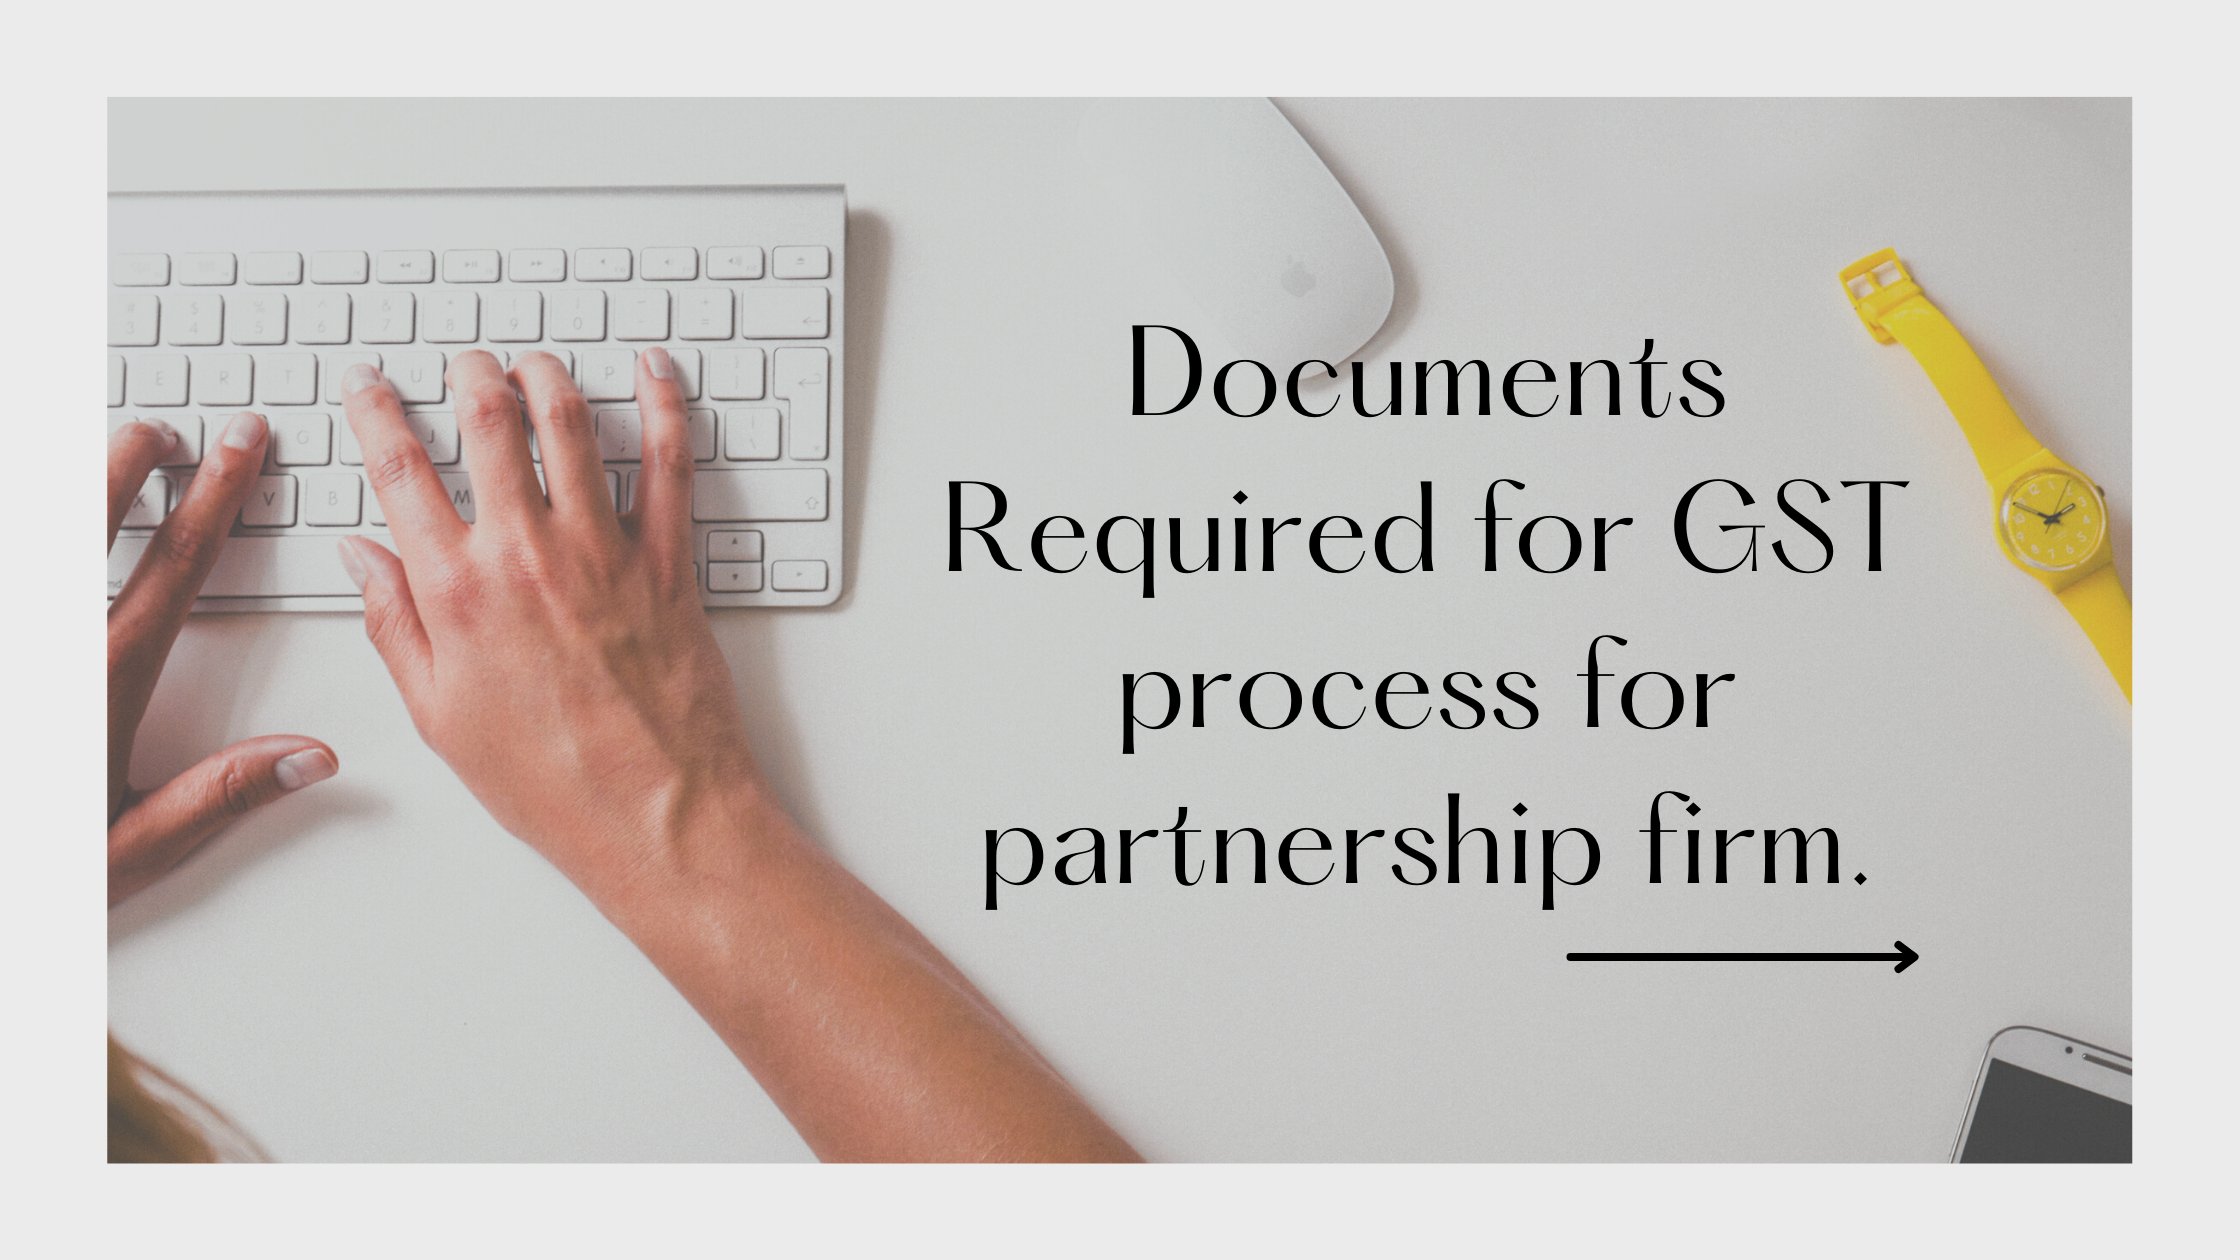 Documents Required for GST process for partnership firm.